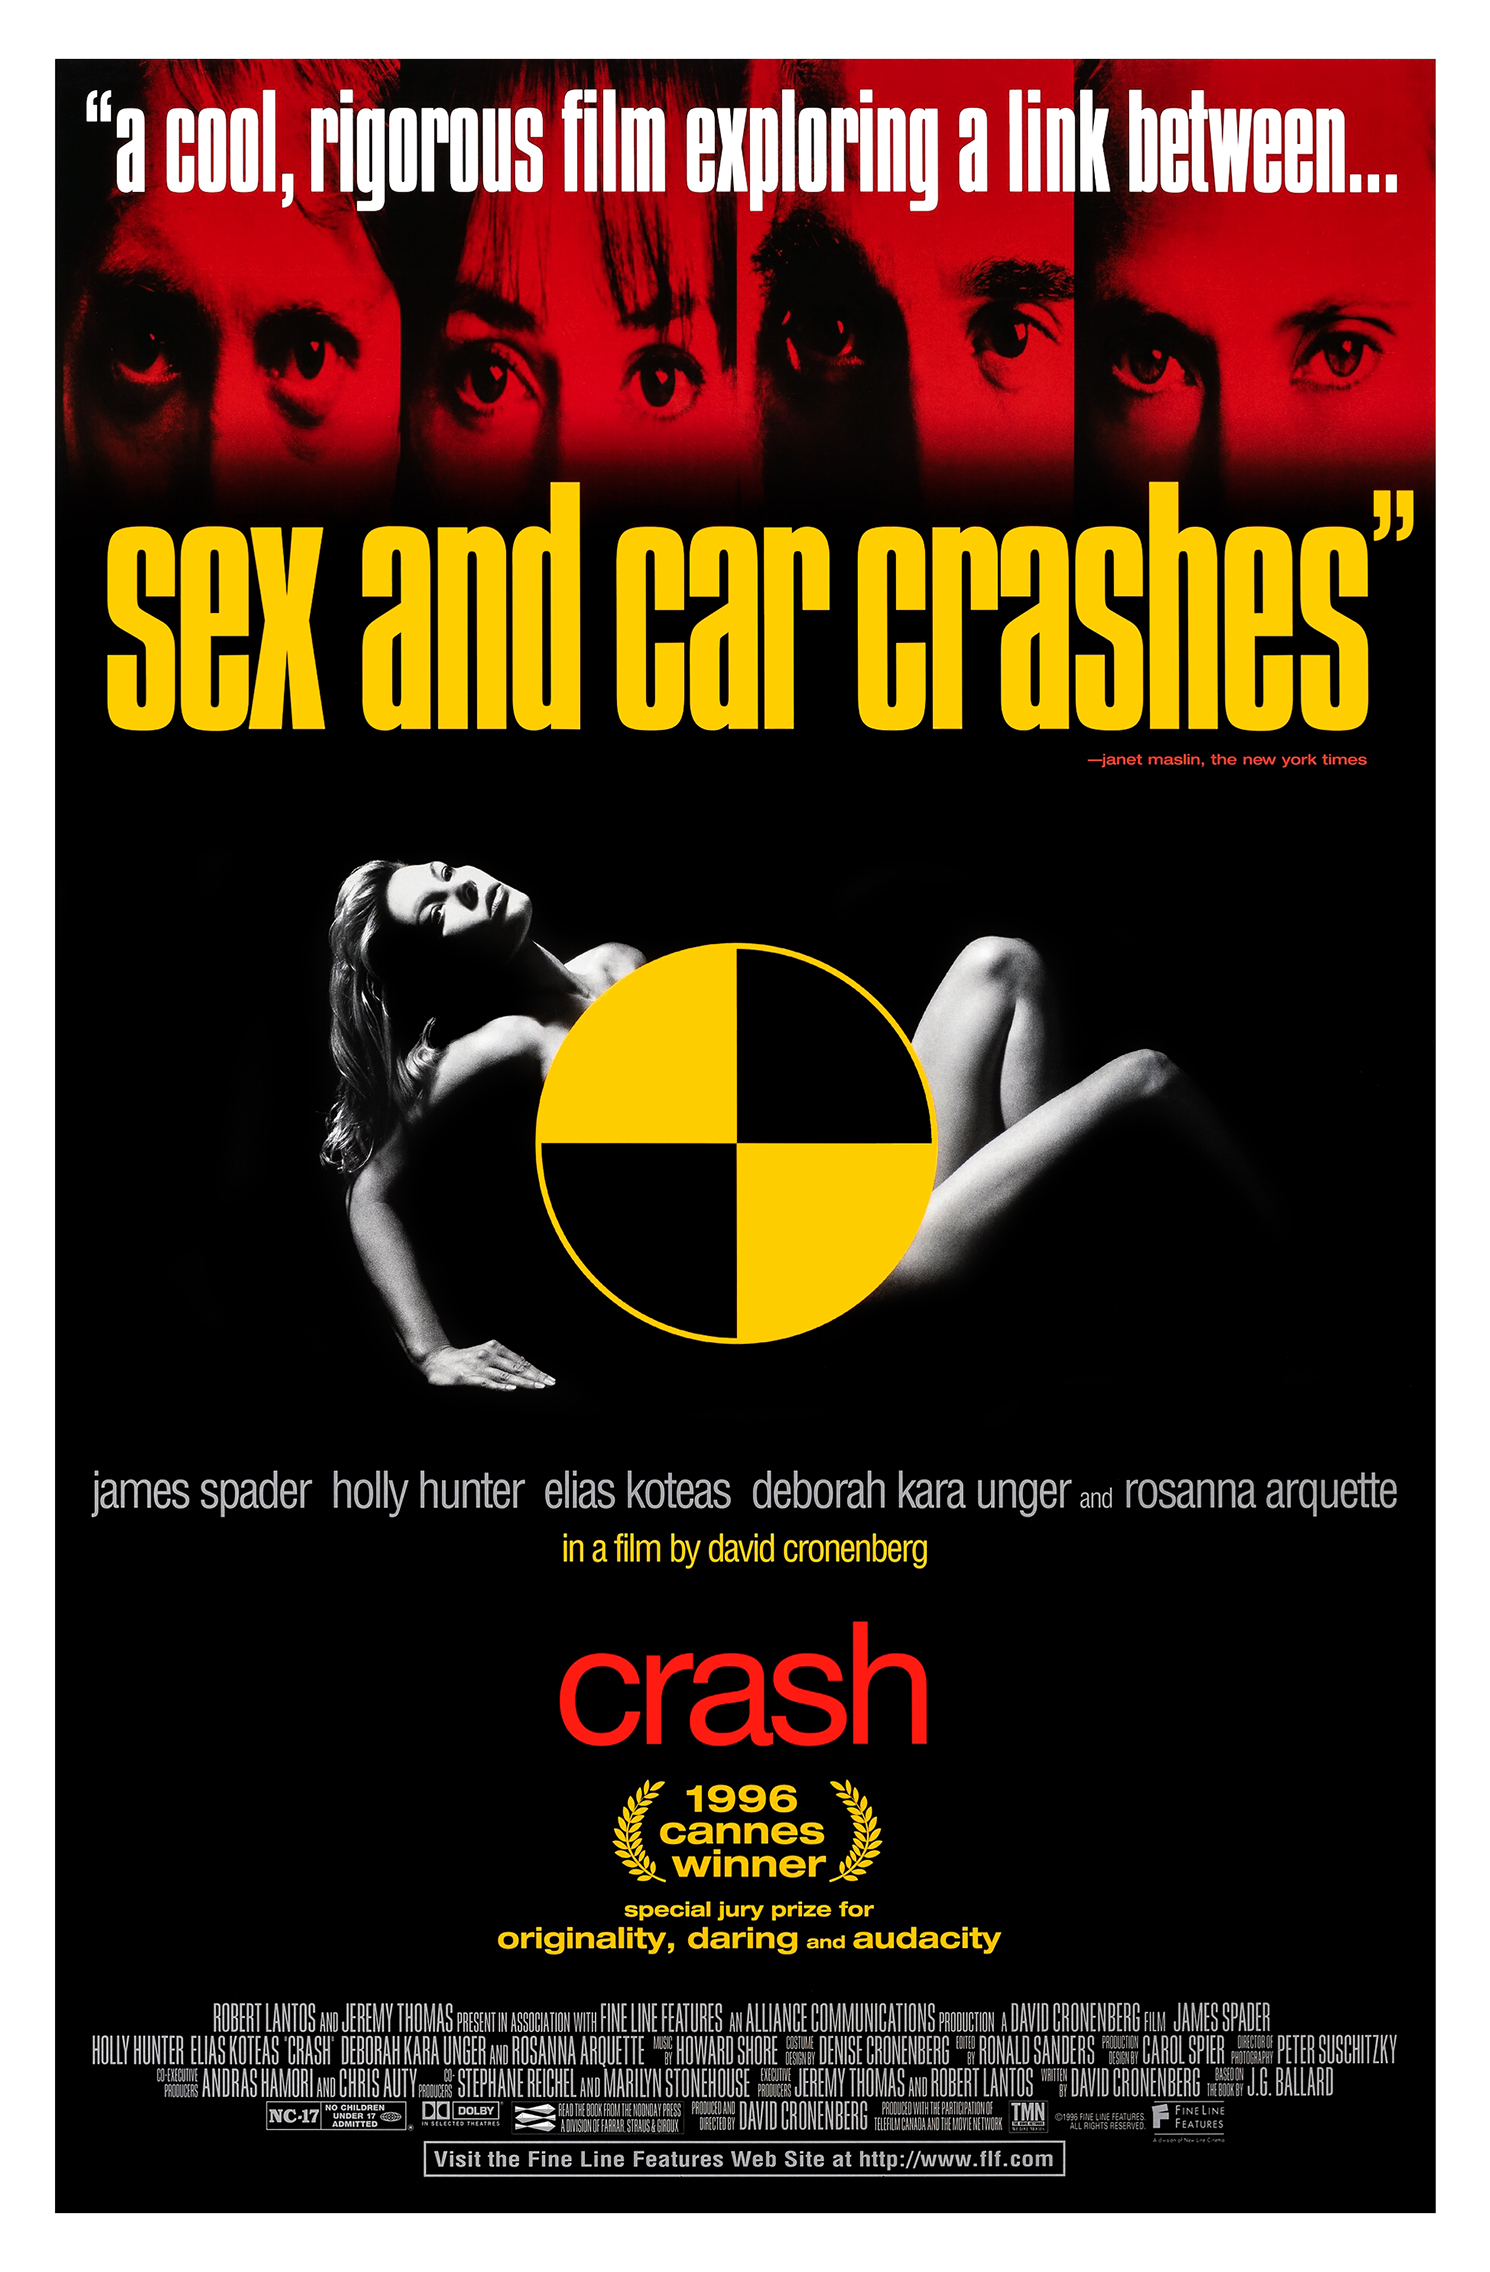 brad goulding recommends Car Crush Fetish Stories